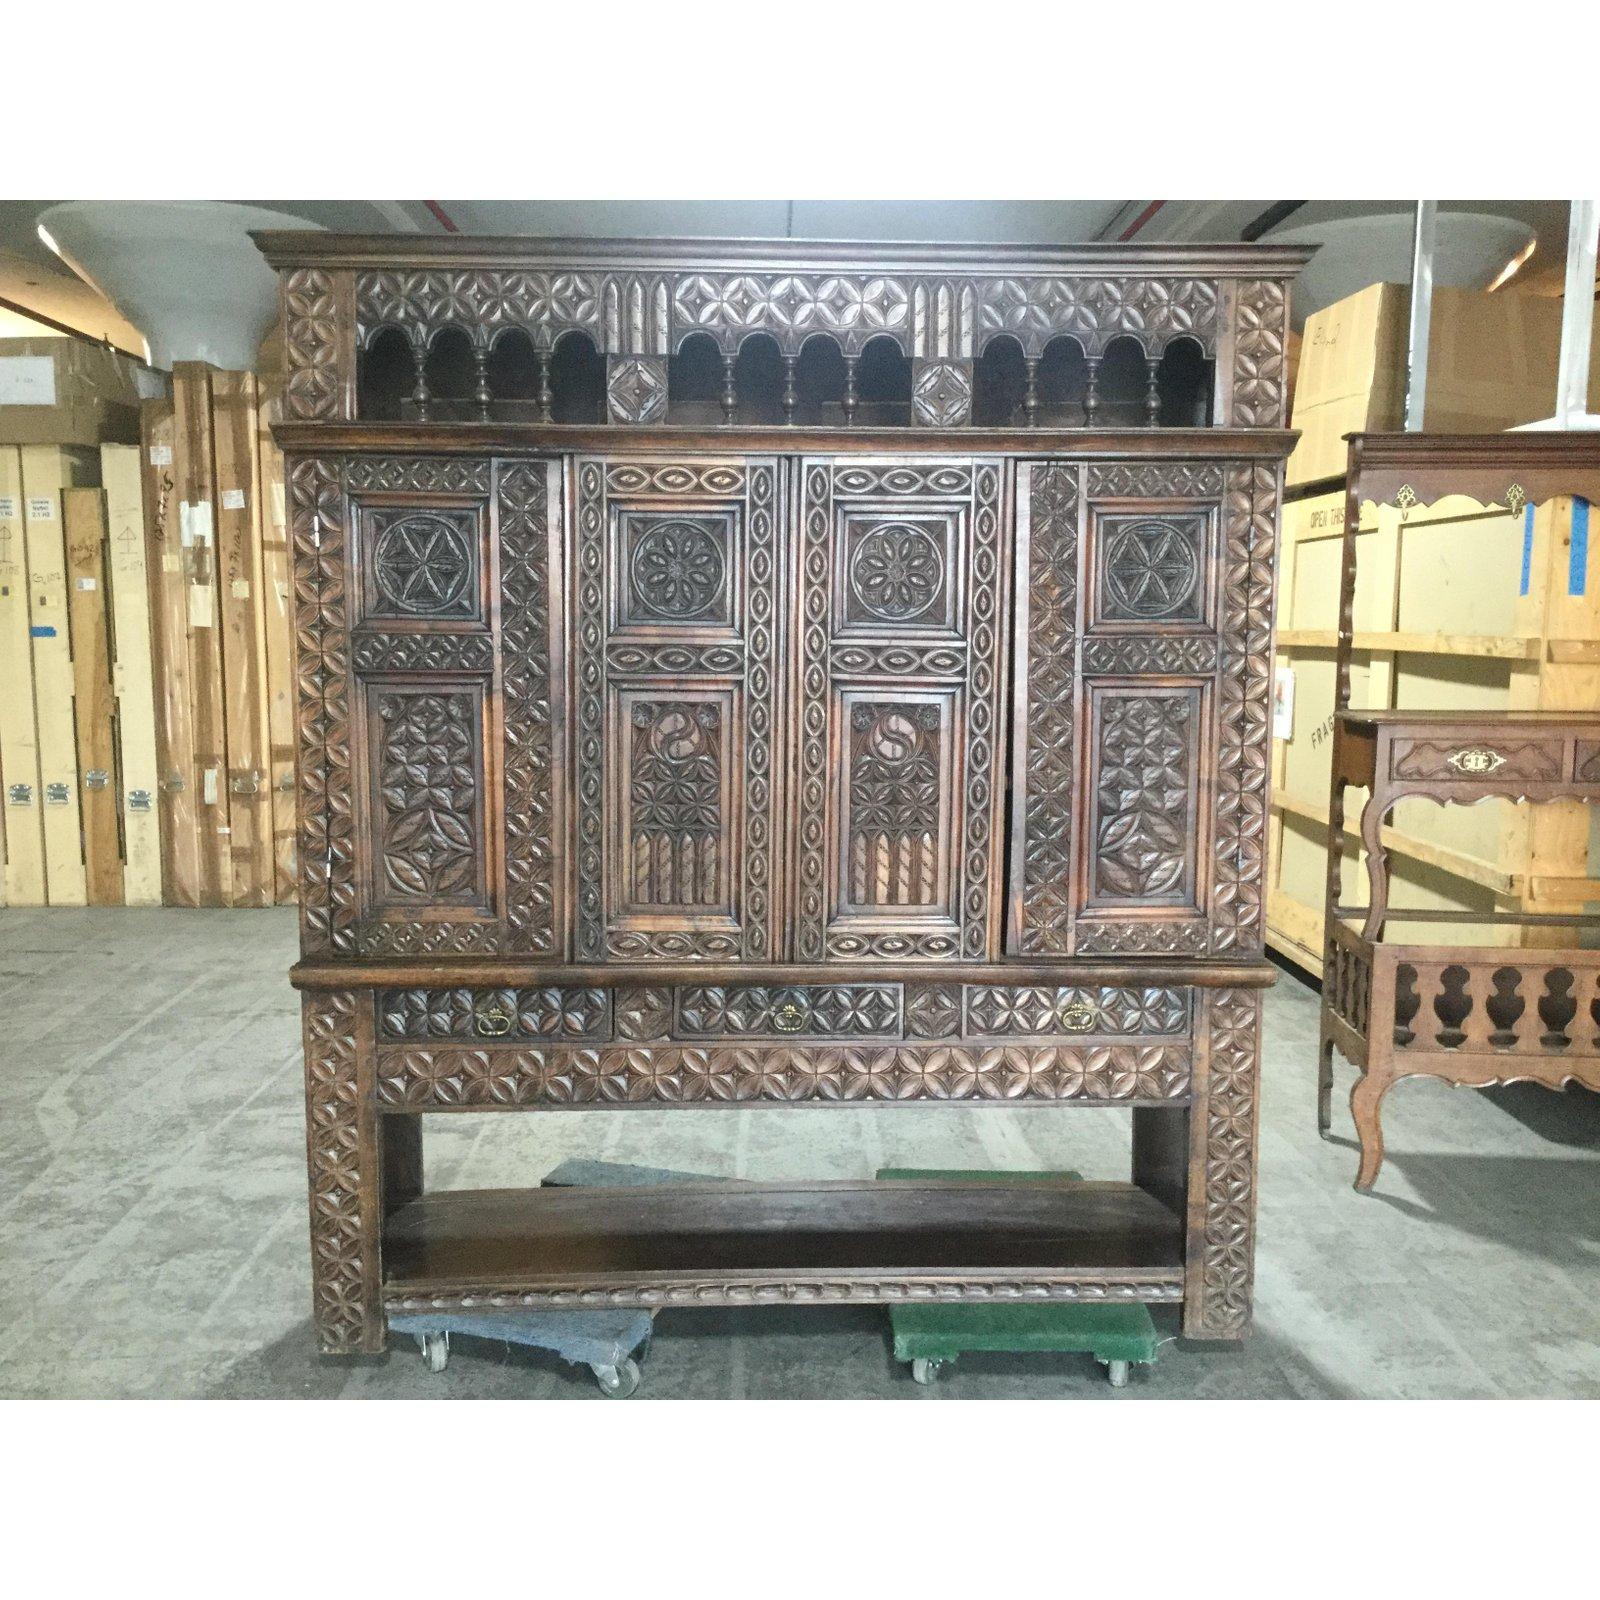 Very unusual regional piece from Brittany known as a lit-clos, this piece originated as a recessed bed, covering the outer wall in a typical 19th century farmhouse. Made of chestnut, there are carvings on all front doors, as well as around the